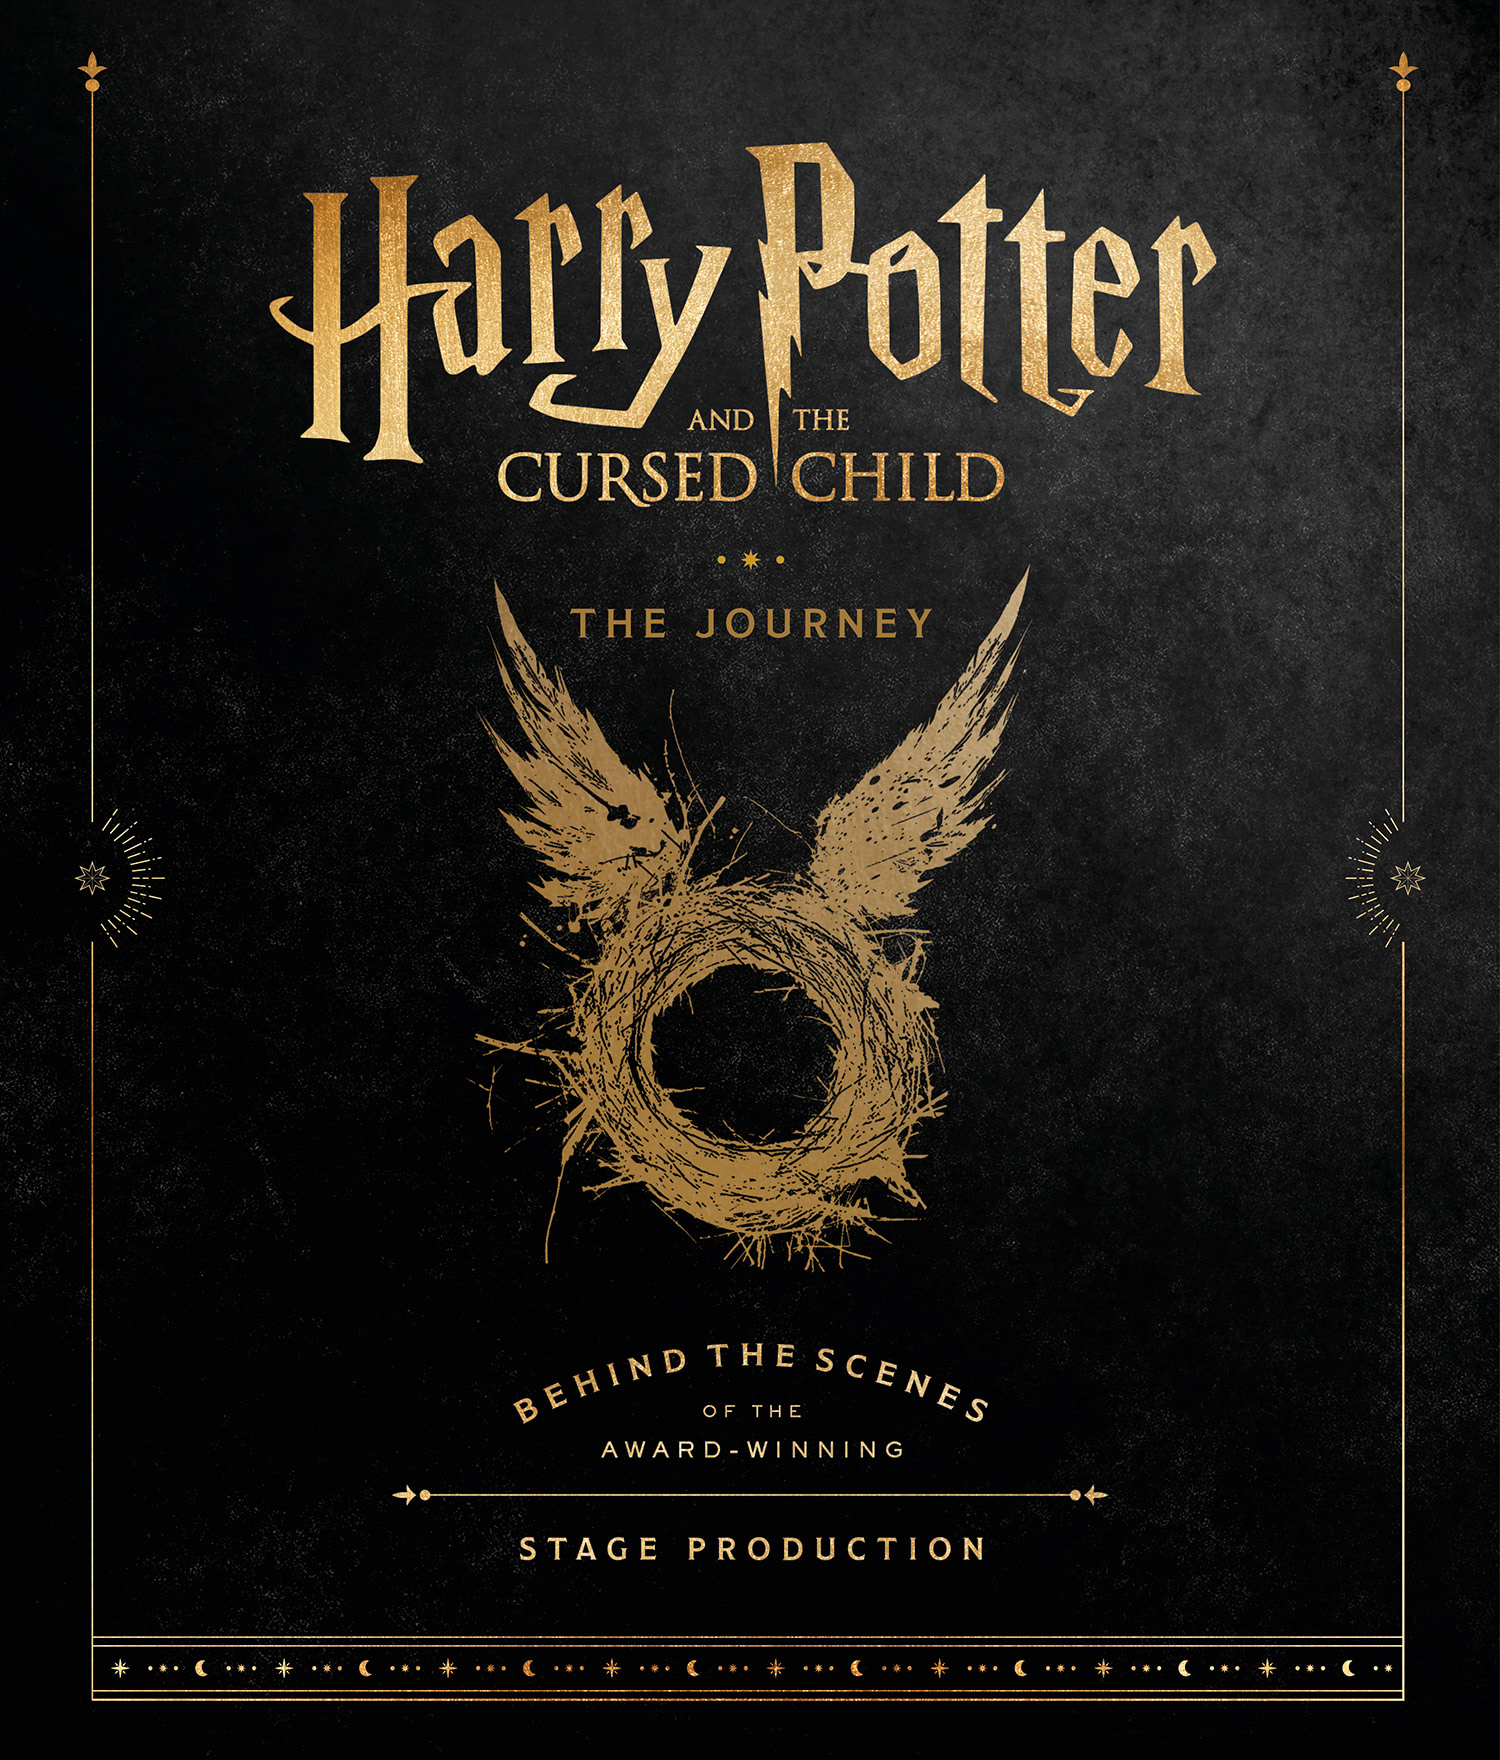 Harry Potter and the Cursed Child: The Journey: Behind the Scenes of the Award-Winning Production